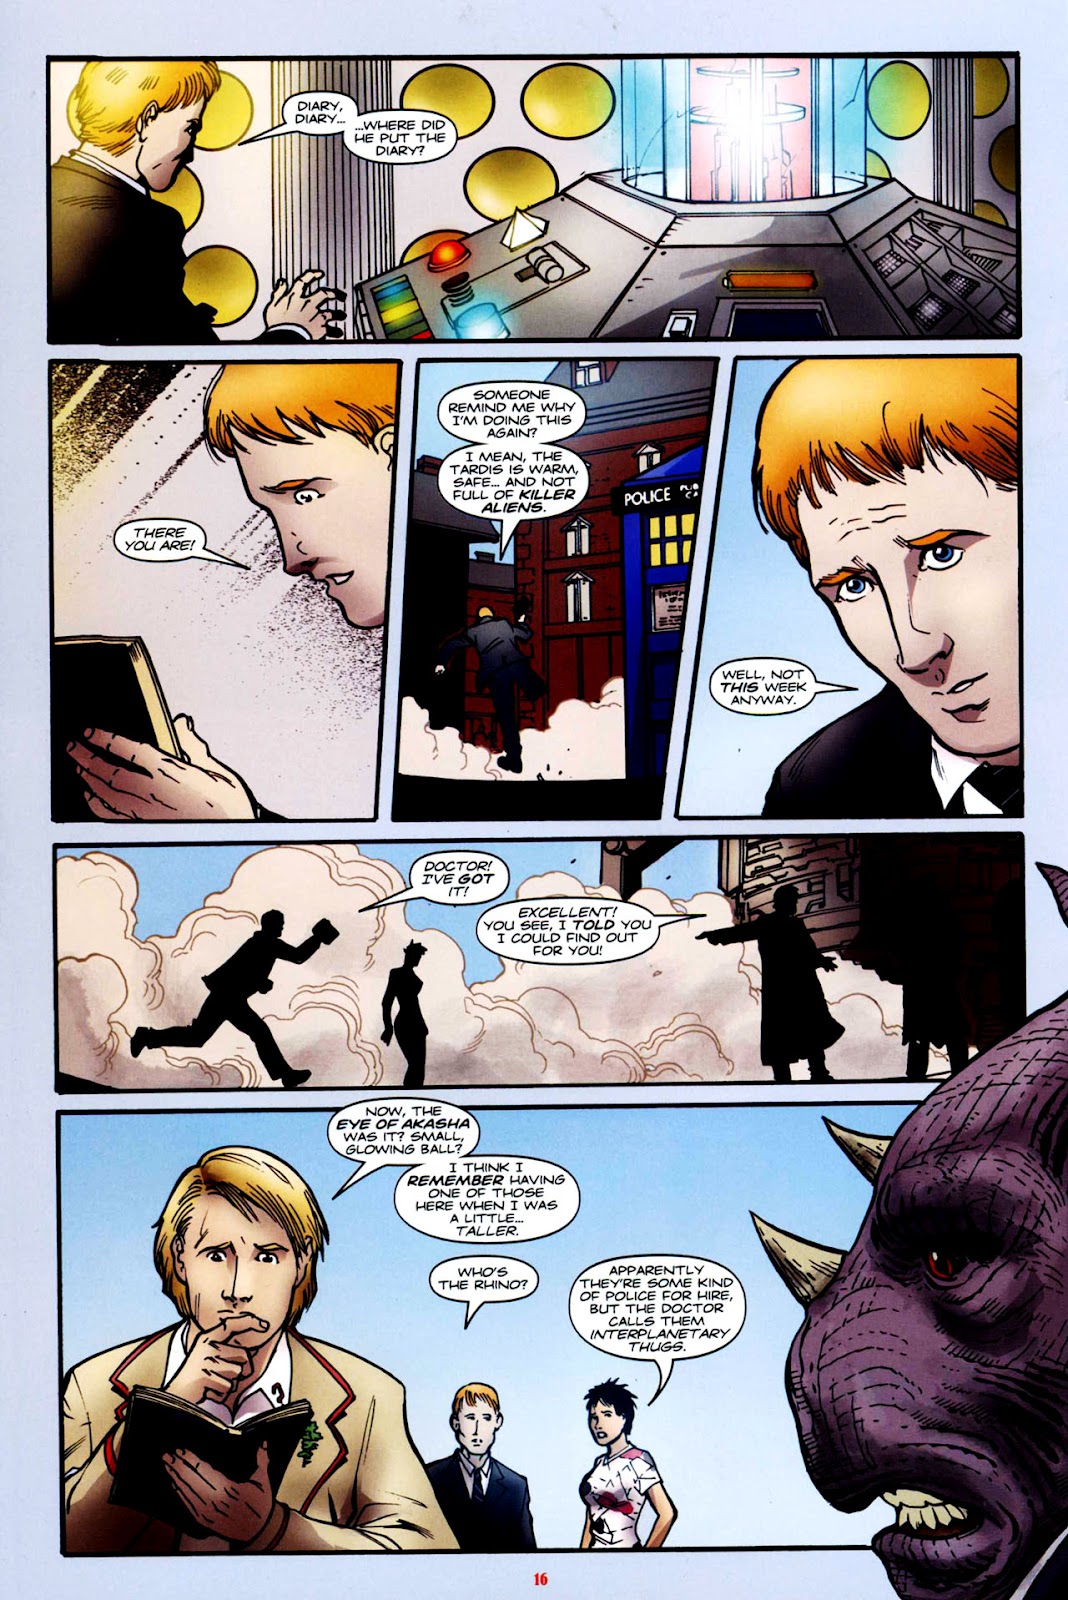 Doctor Who: The Forgotten issue 3 - Page 17